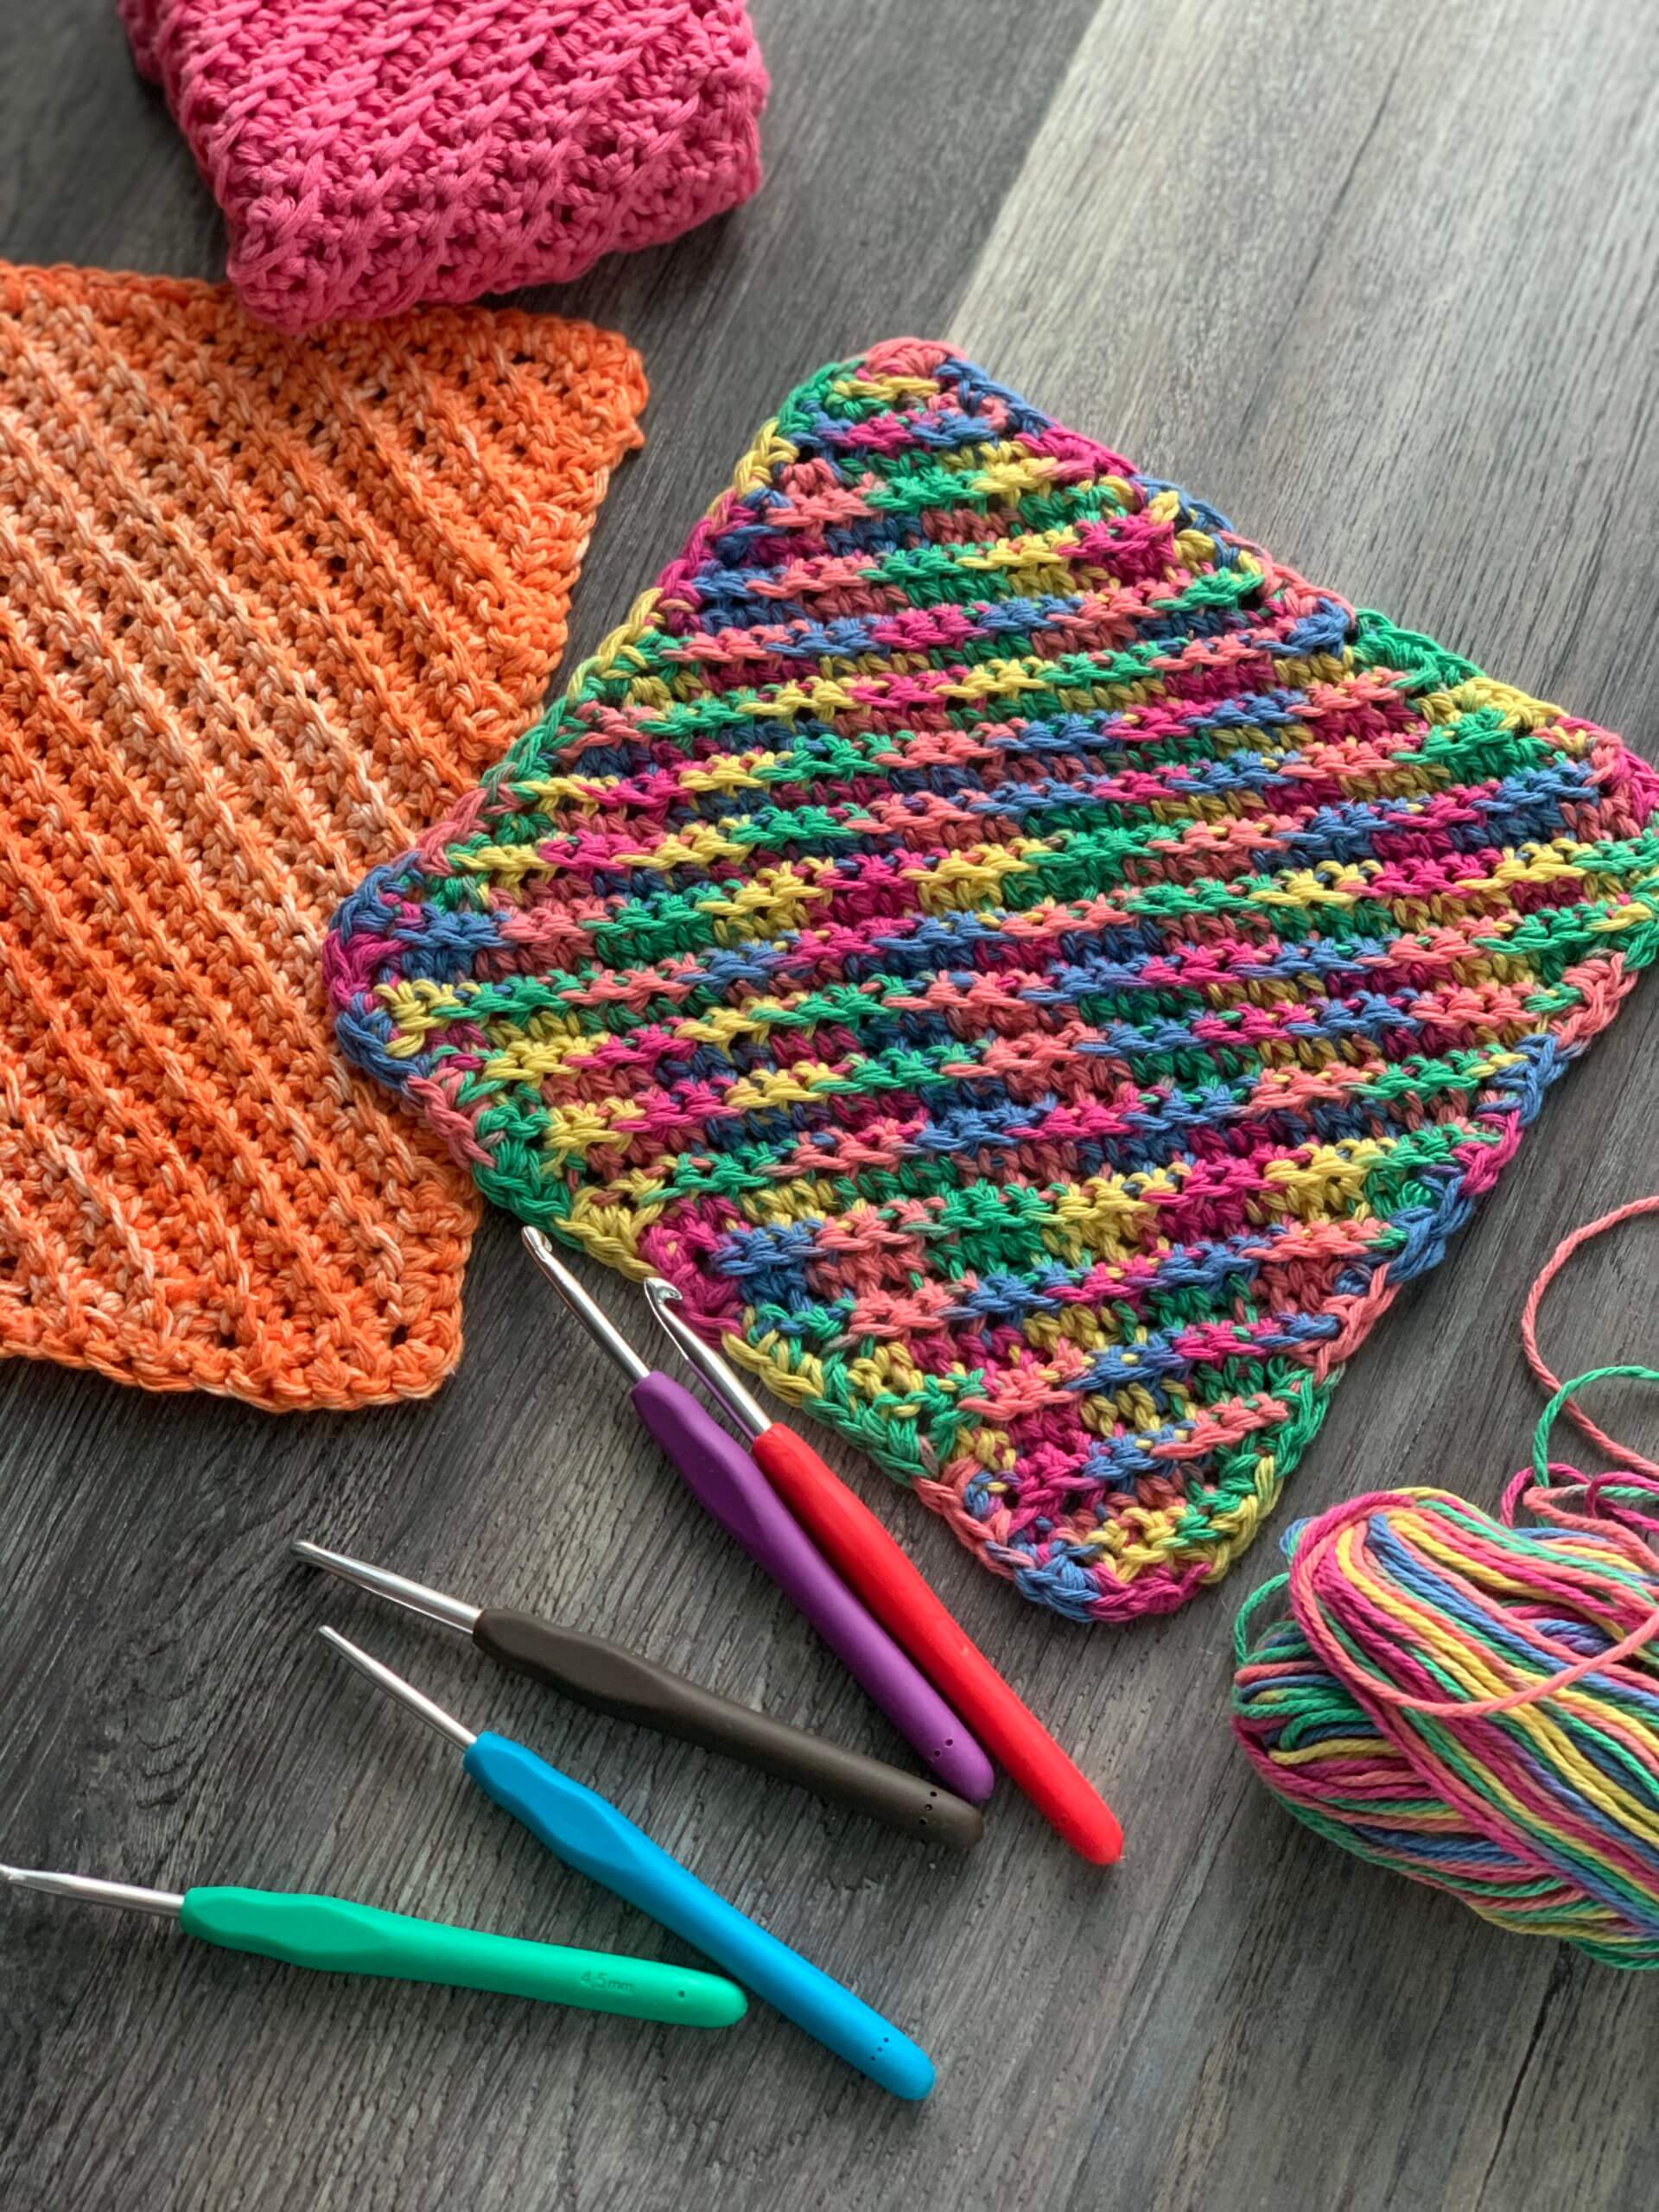 Colorful Knitted Grid Pattern For Dishcloth Crochet Dishcloth Patterns